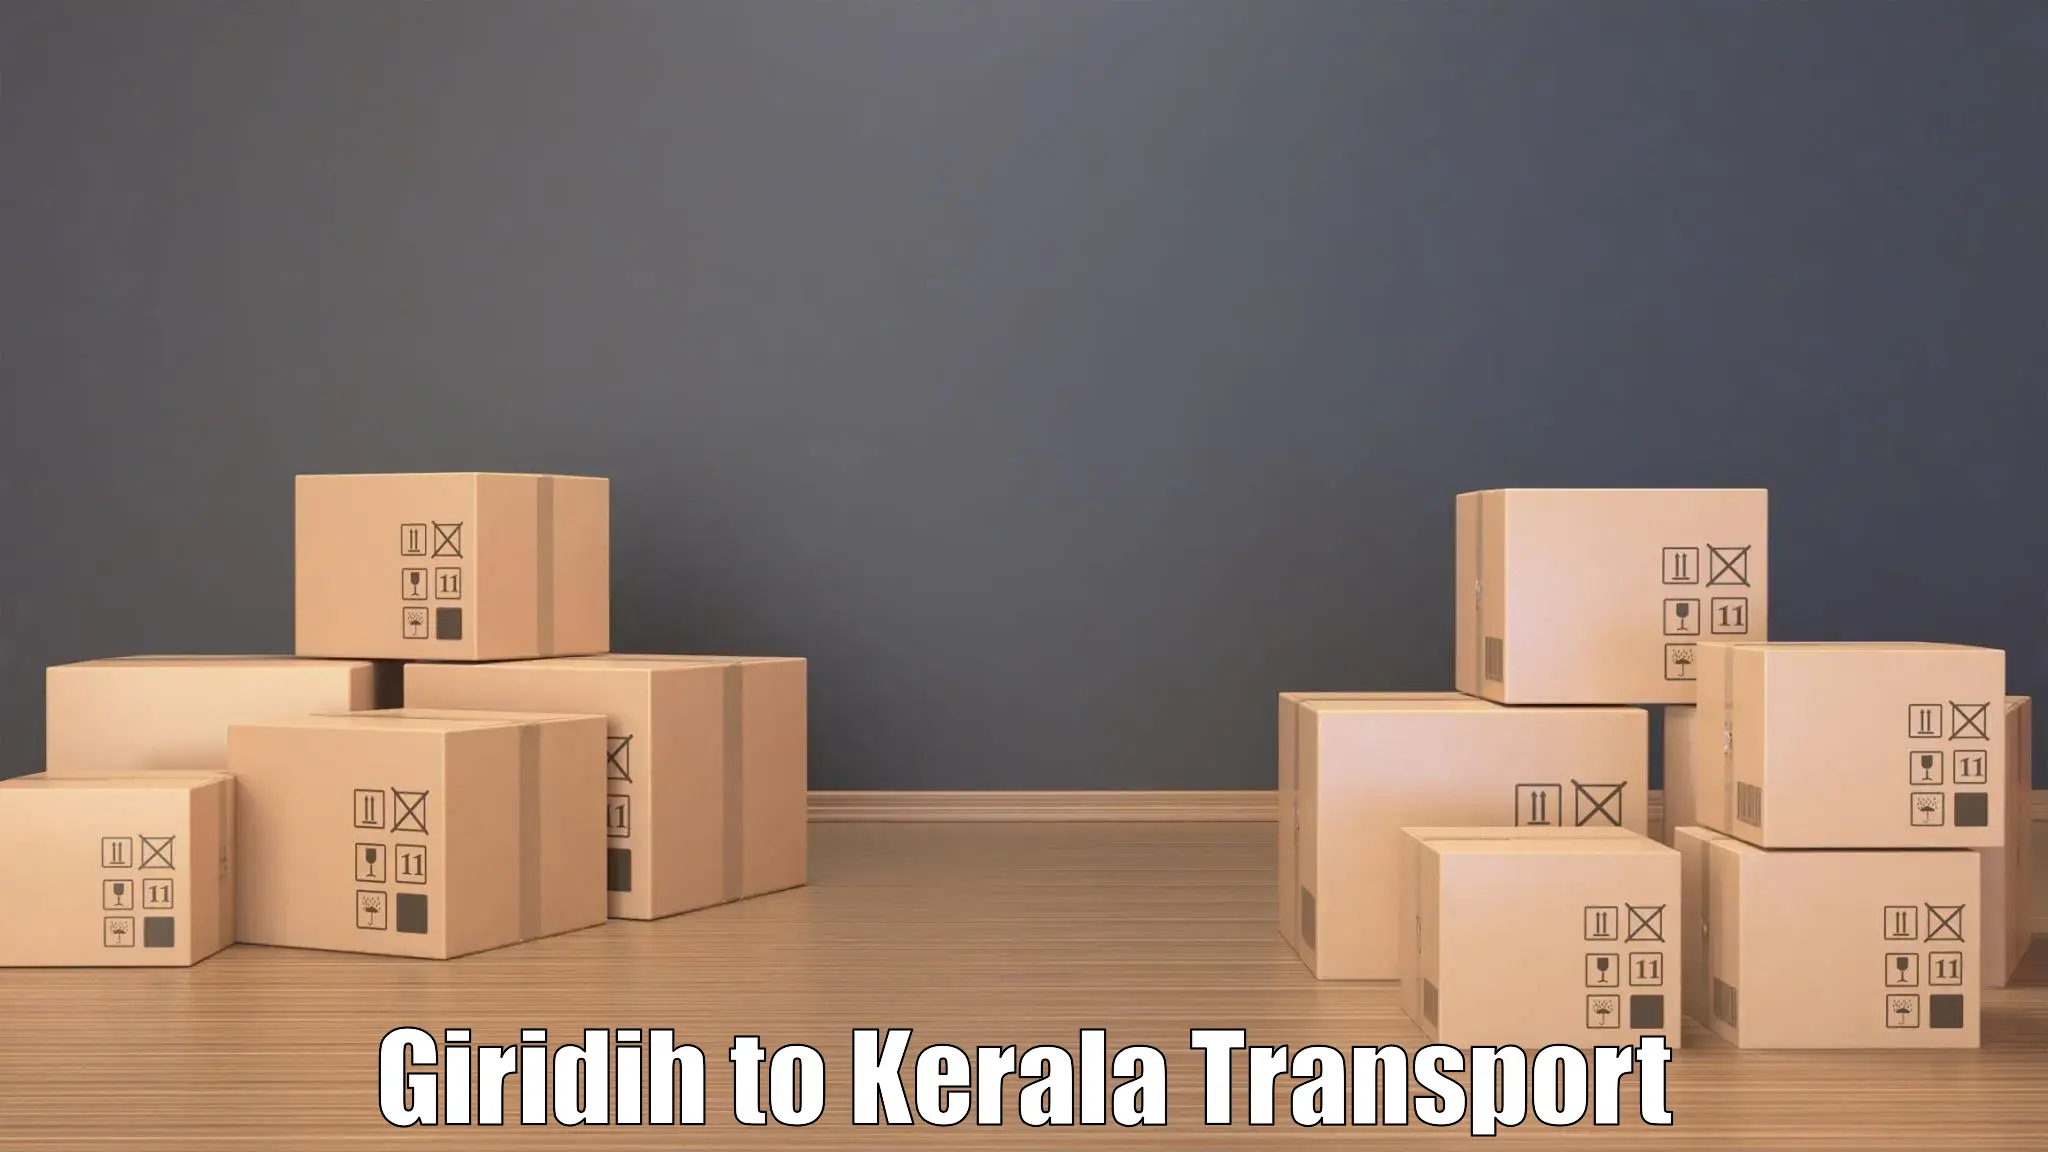 Container transport service Giridih to Cochin University of Science and Technology